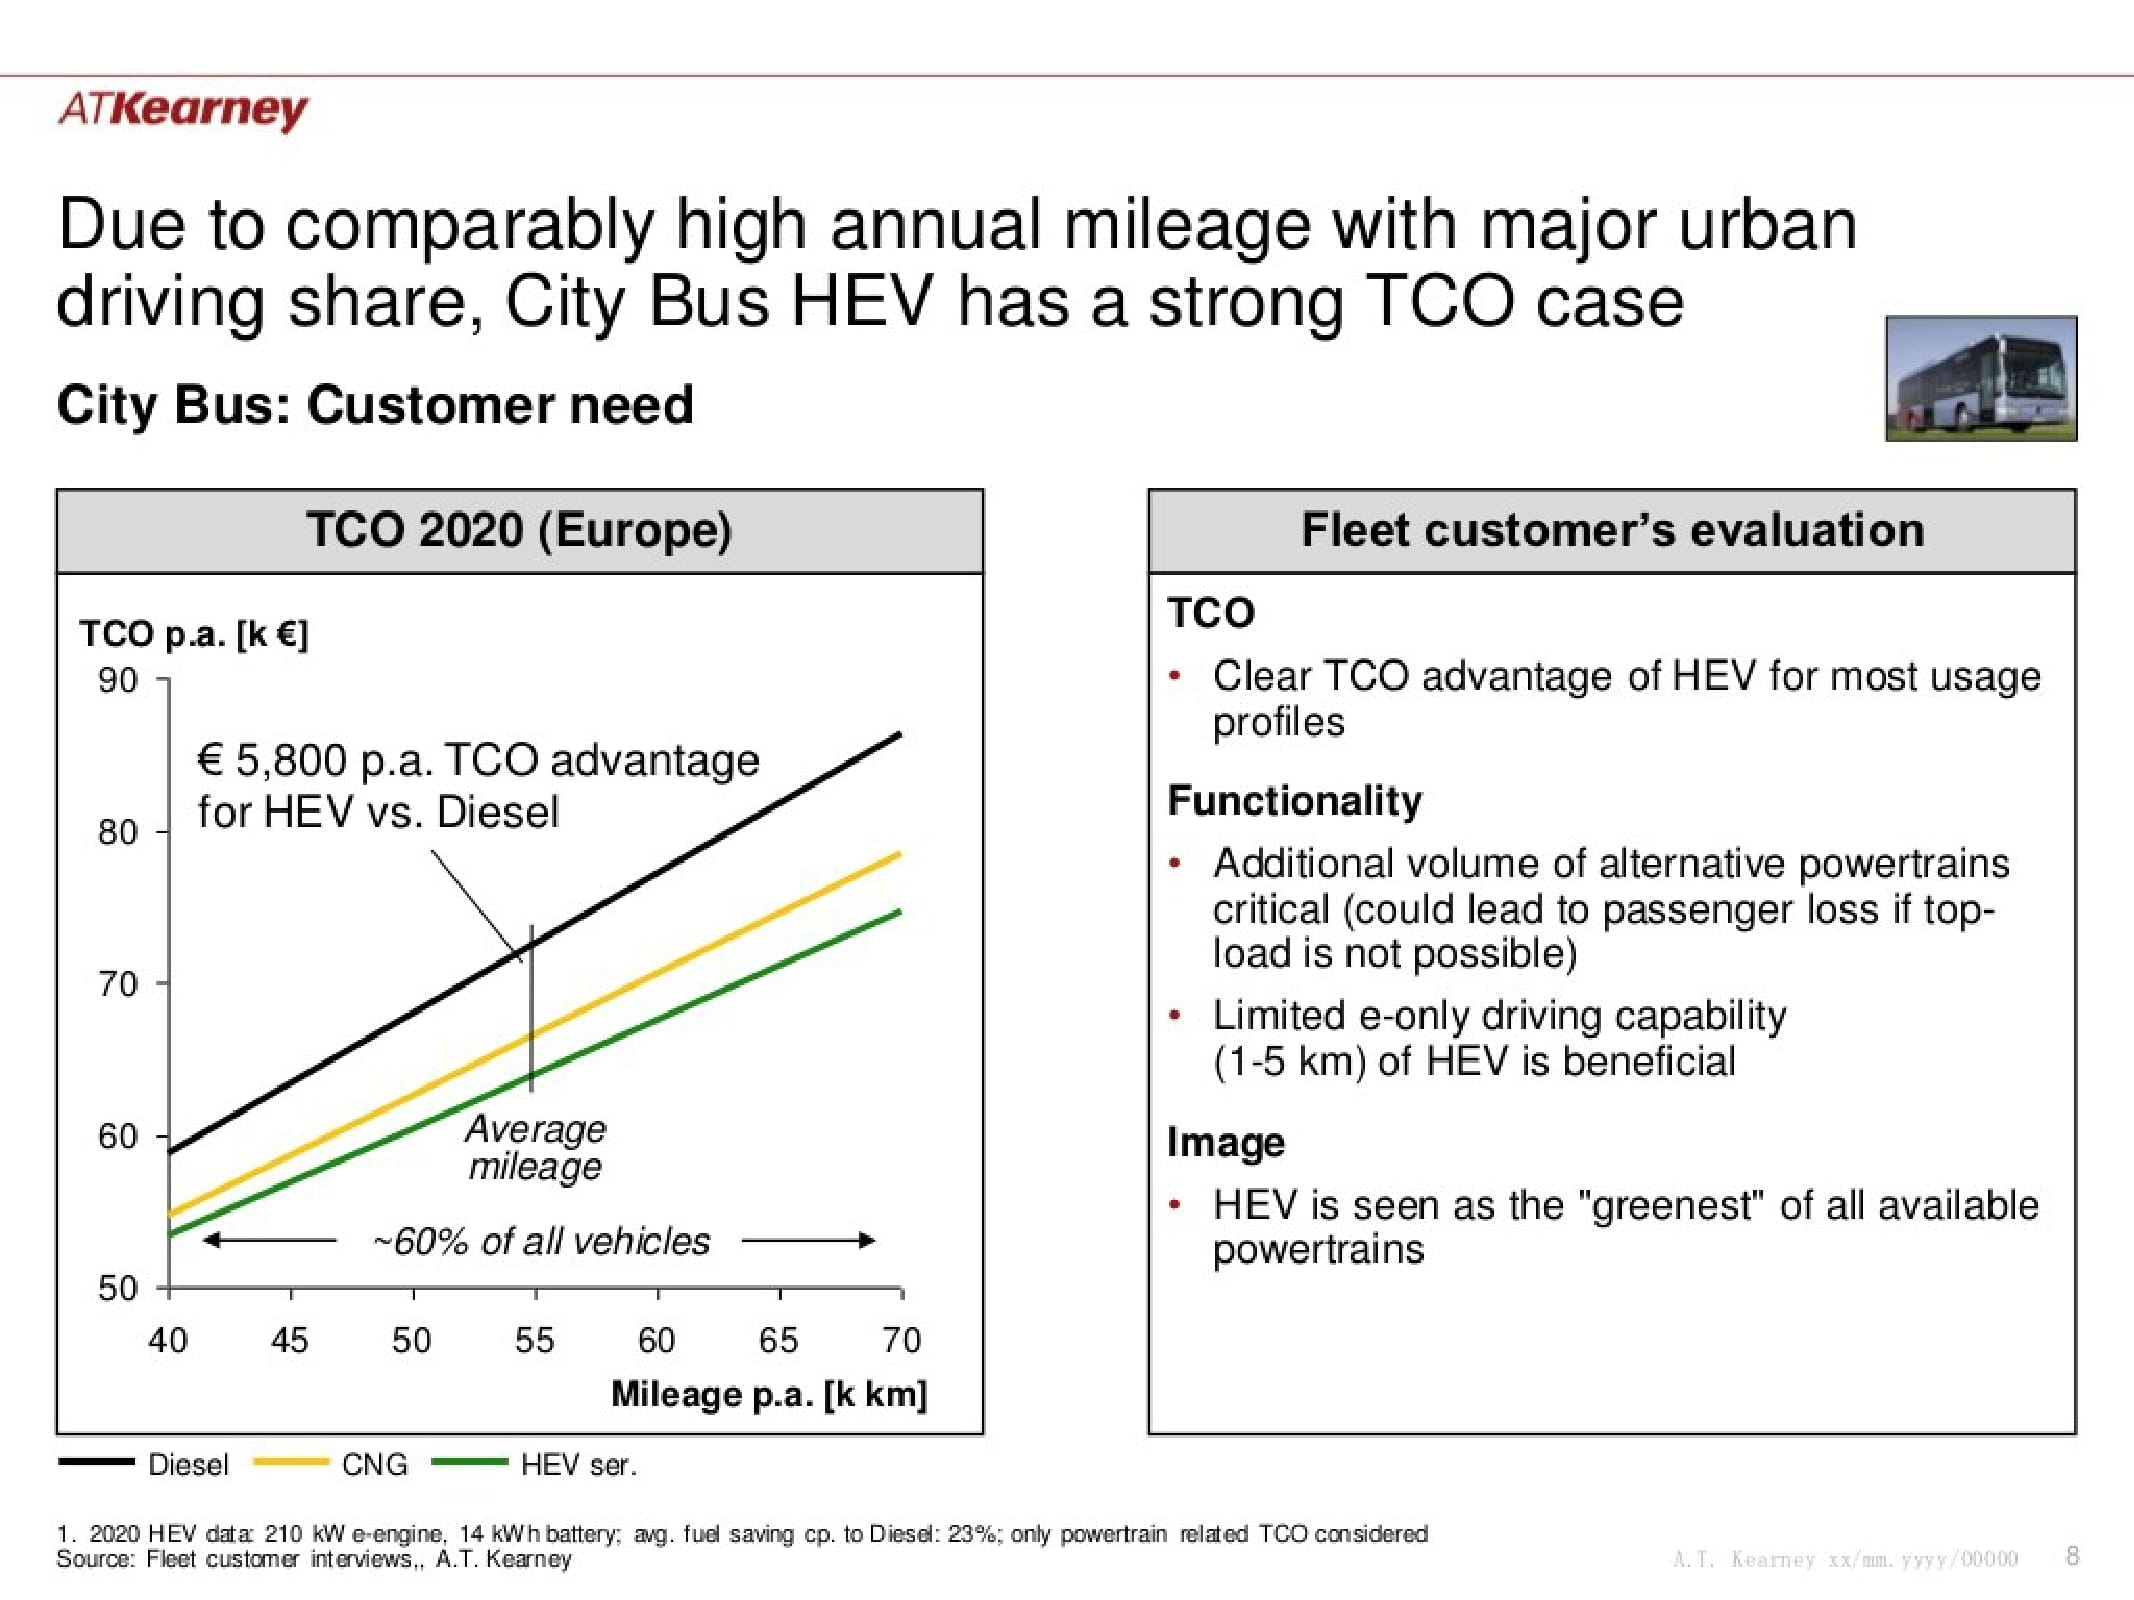 A.T. Kearney: The Future of Commercial Vehicle Powertrains Slide 8